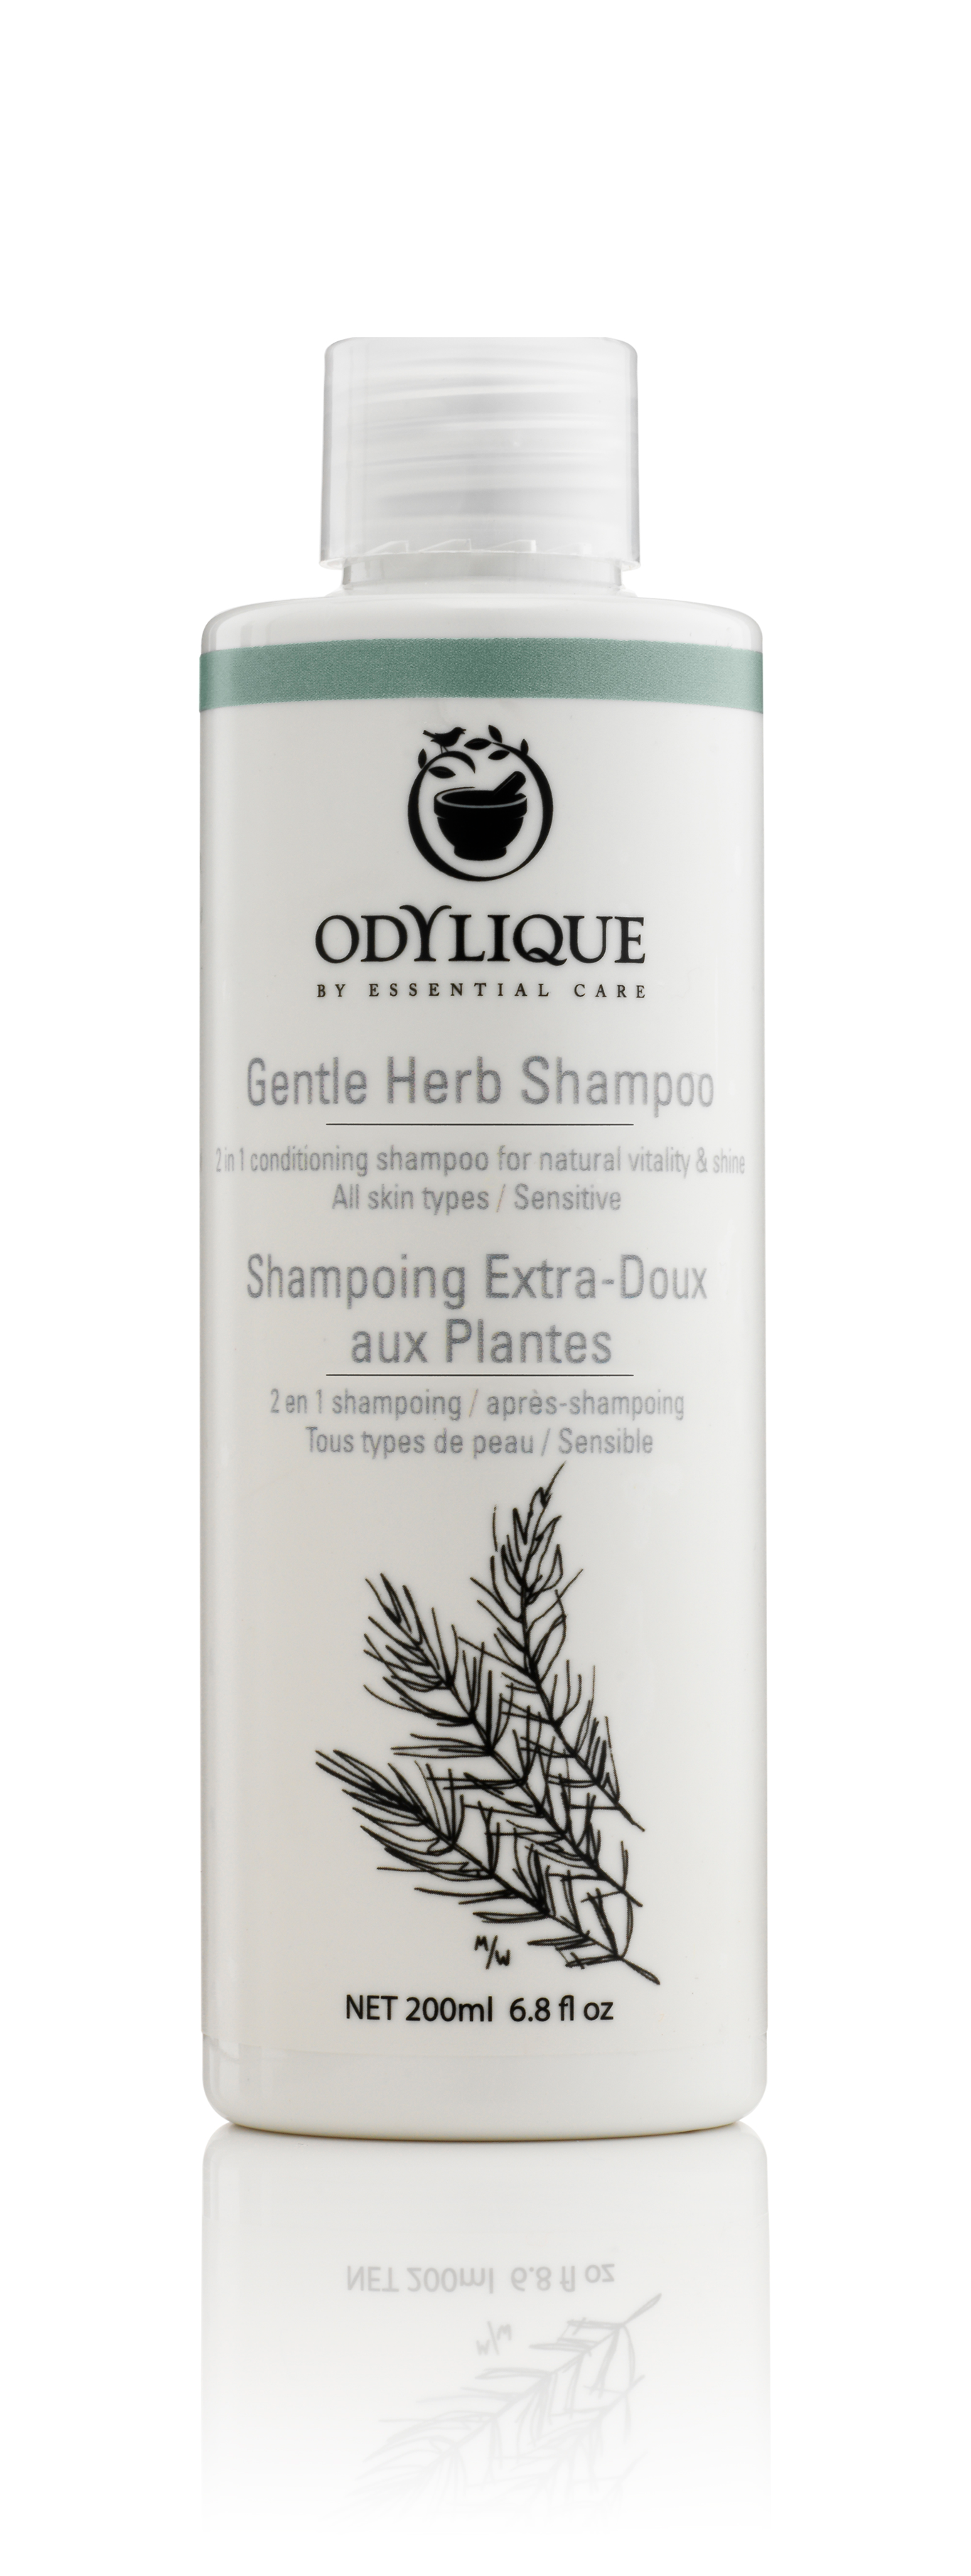 Odylique Gentle Herb Shampoo 200ml. Natural haircare. 